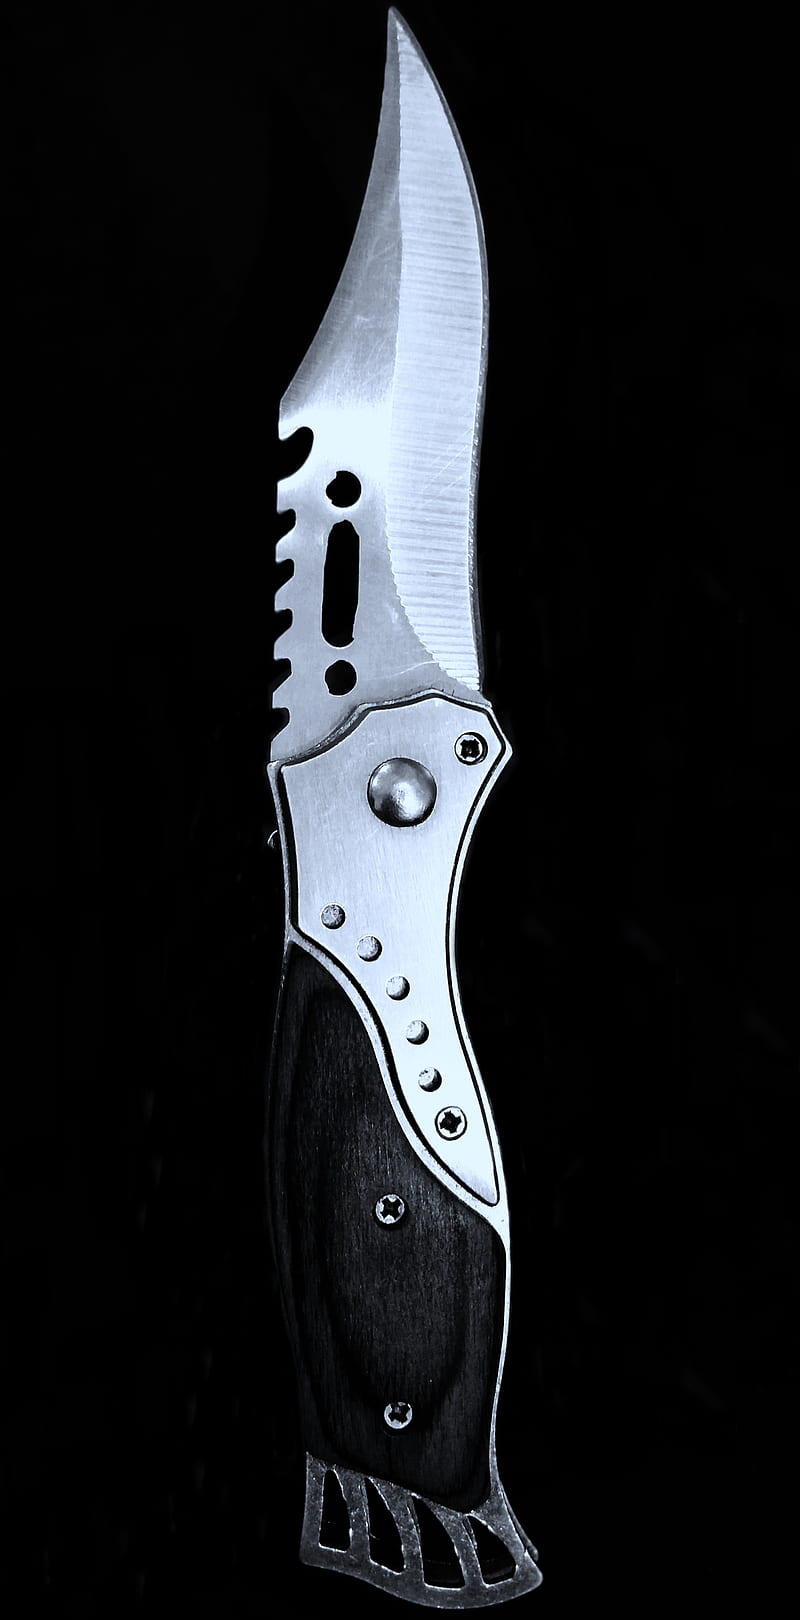 SOG knife wallpaper by marineseal  Download on ZEDGE  b49a